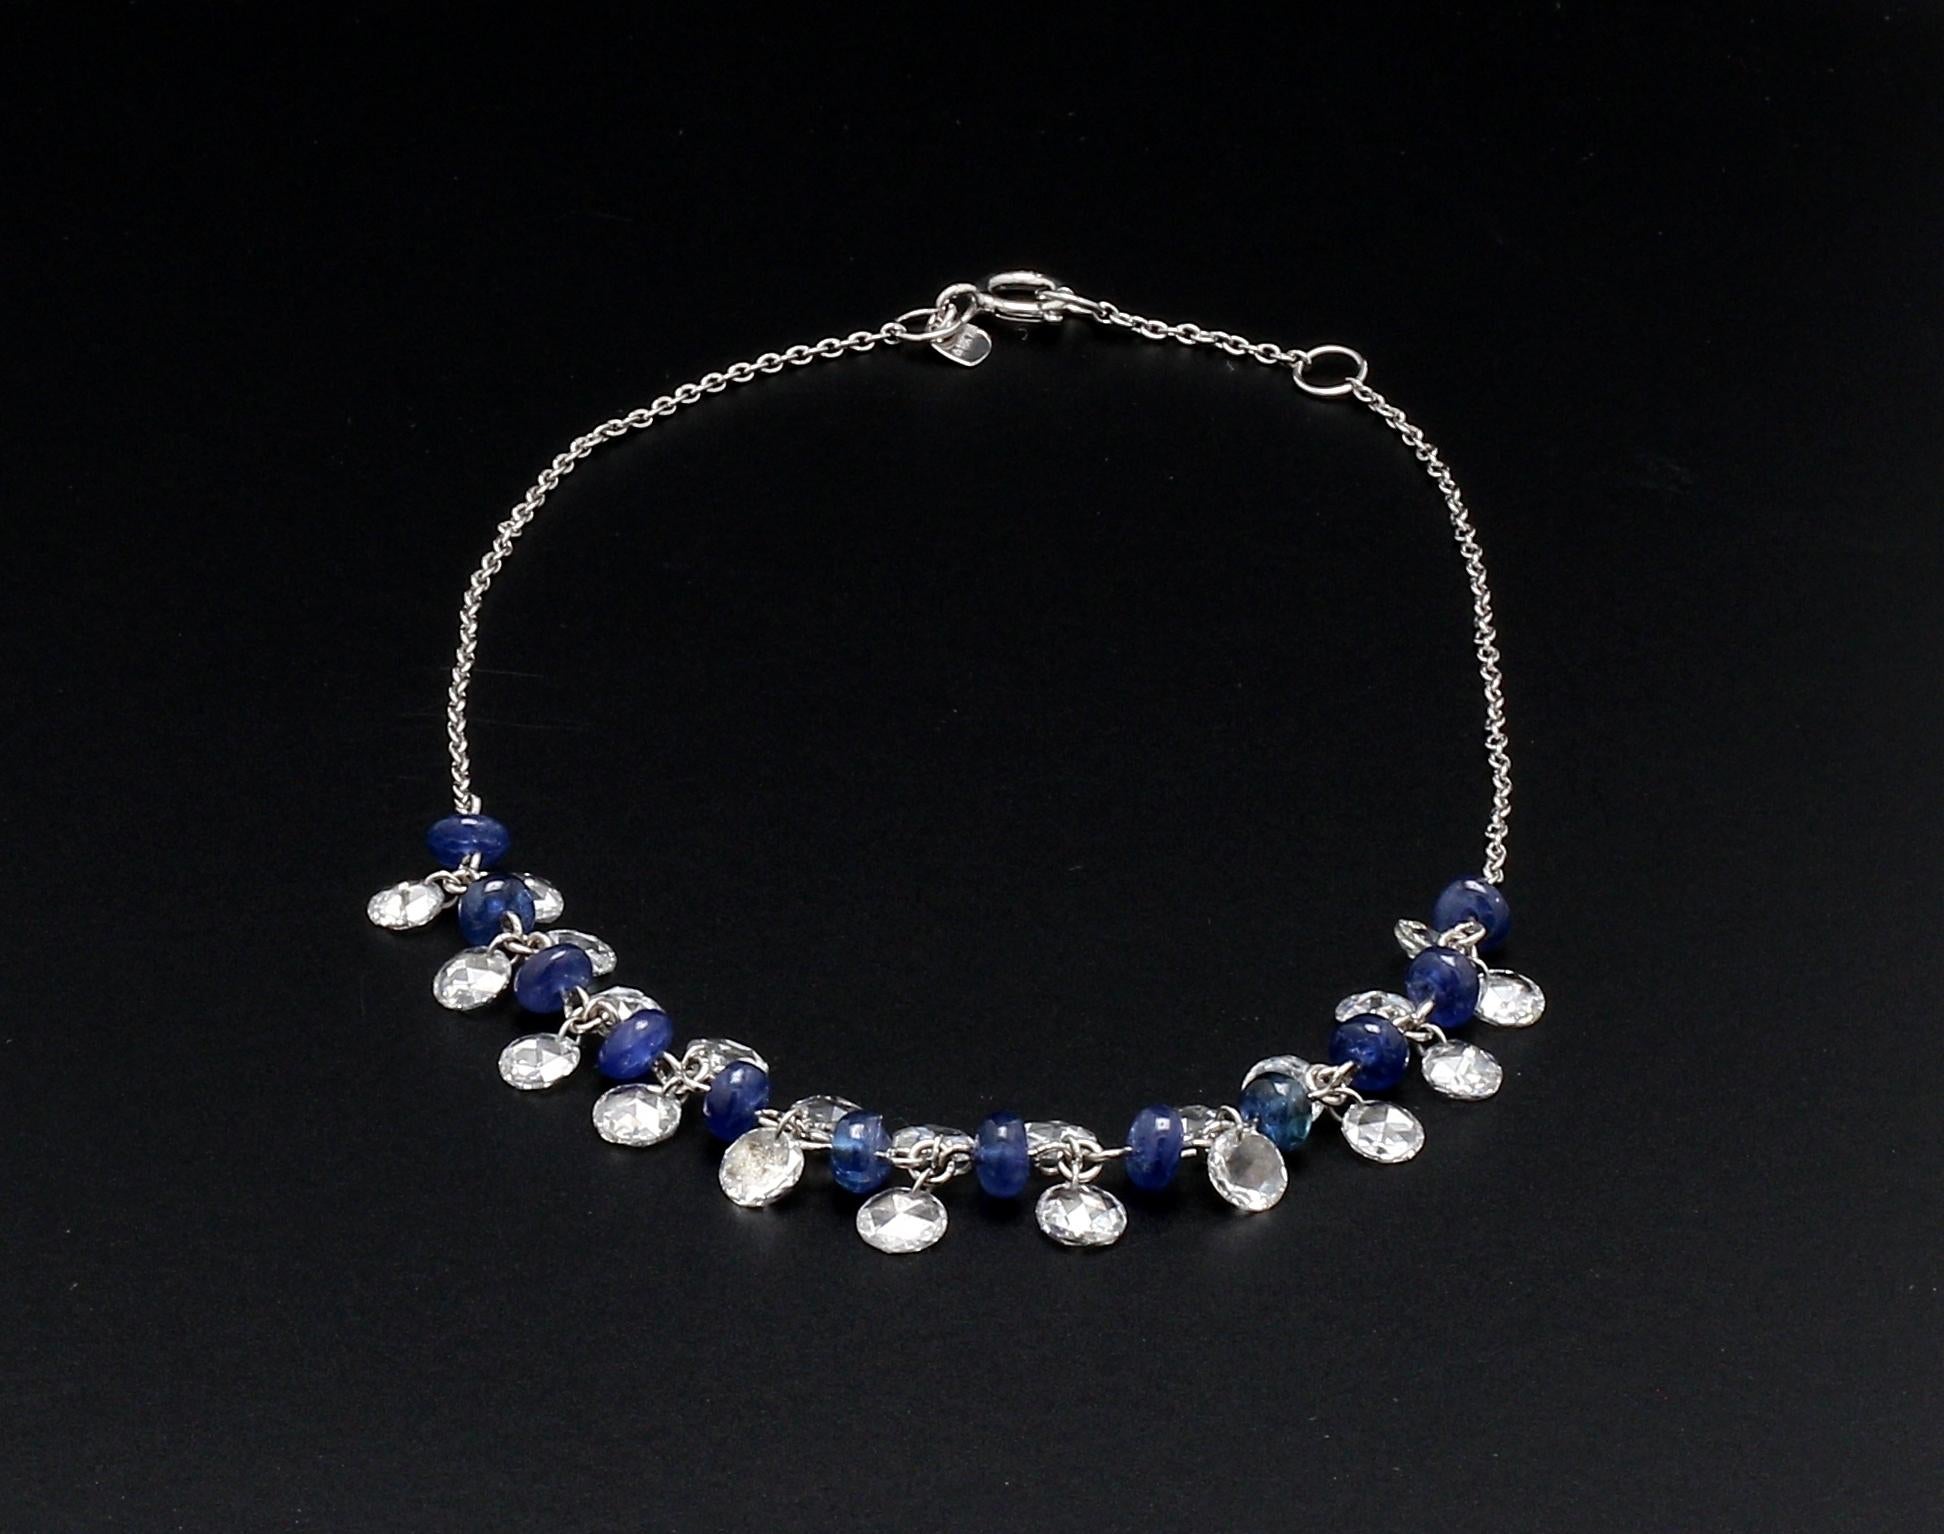 Panim Rose Cut Diamond And Sapphire Dangling Bracelet in 18 Karat White Gold

Our dangling rose-cut diamond bracelet is extremely wearable. Its versatility and classic design make it a great accompaniment to various occasions. Beautifully made with